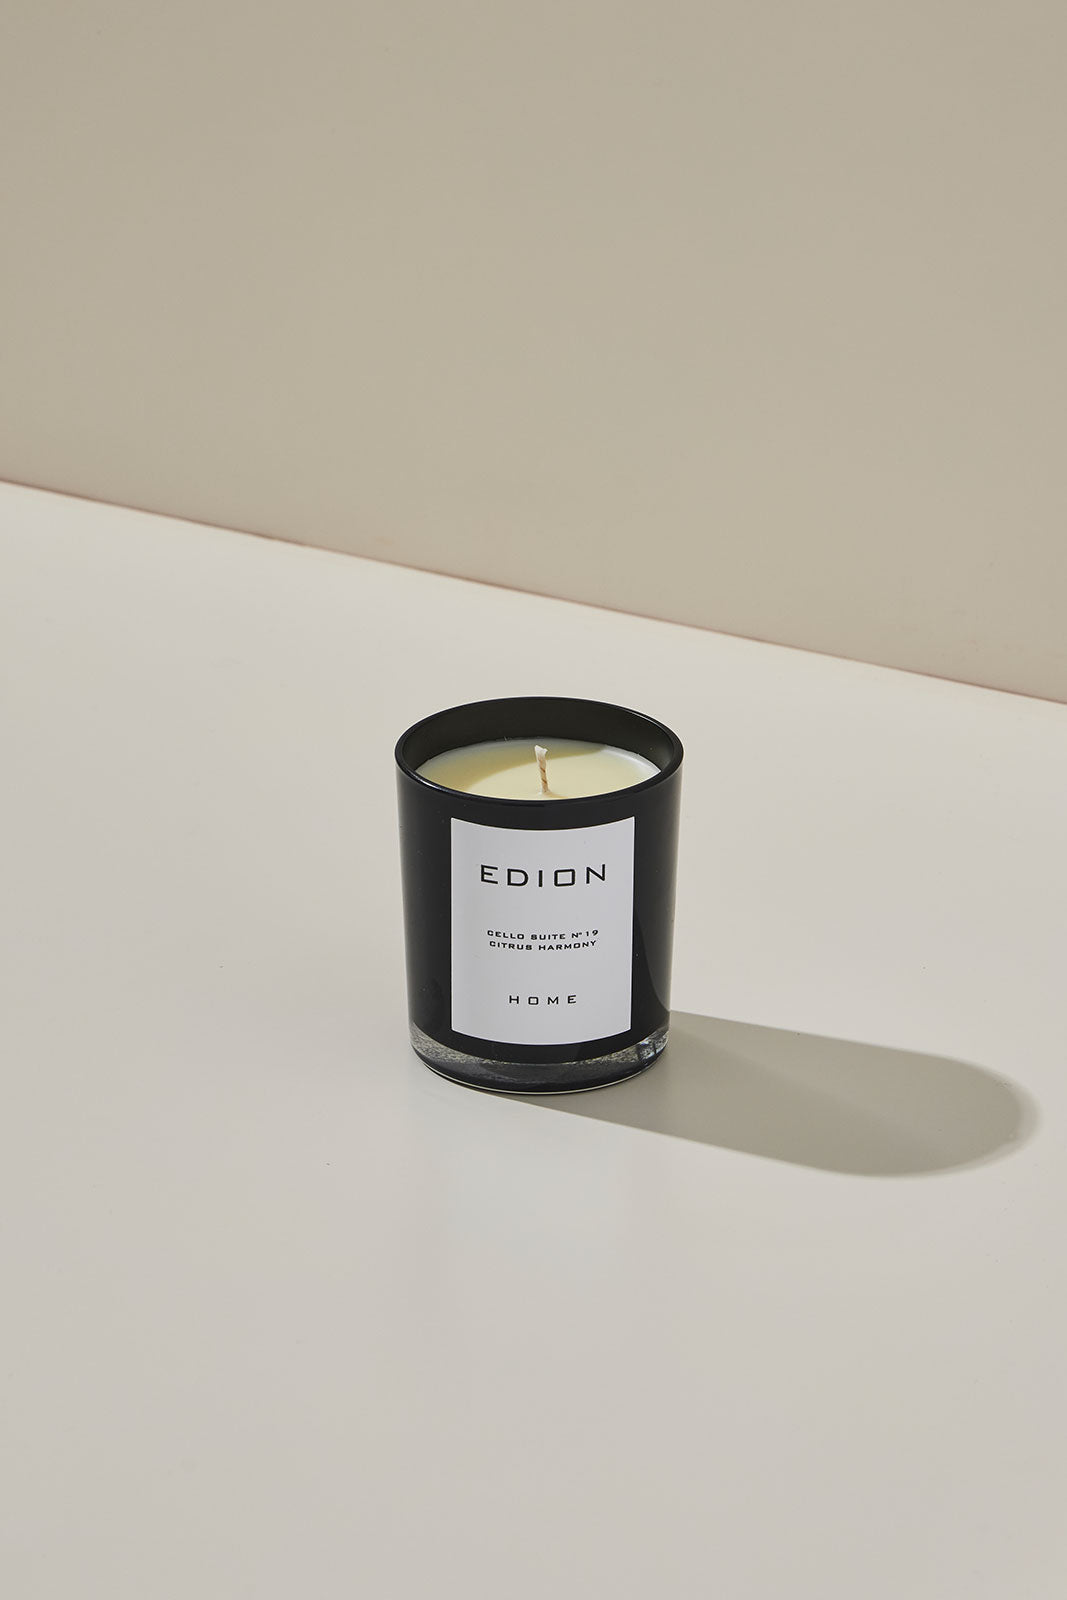 Scented candle Cello suite n.19 citrus harmony